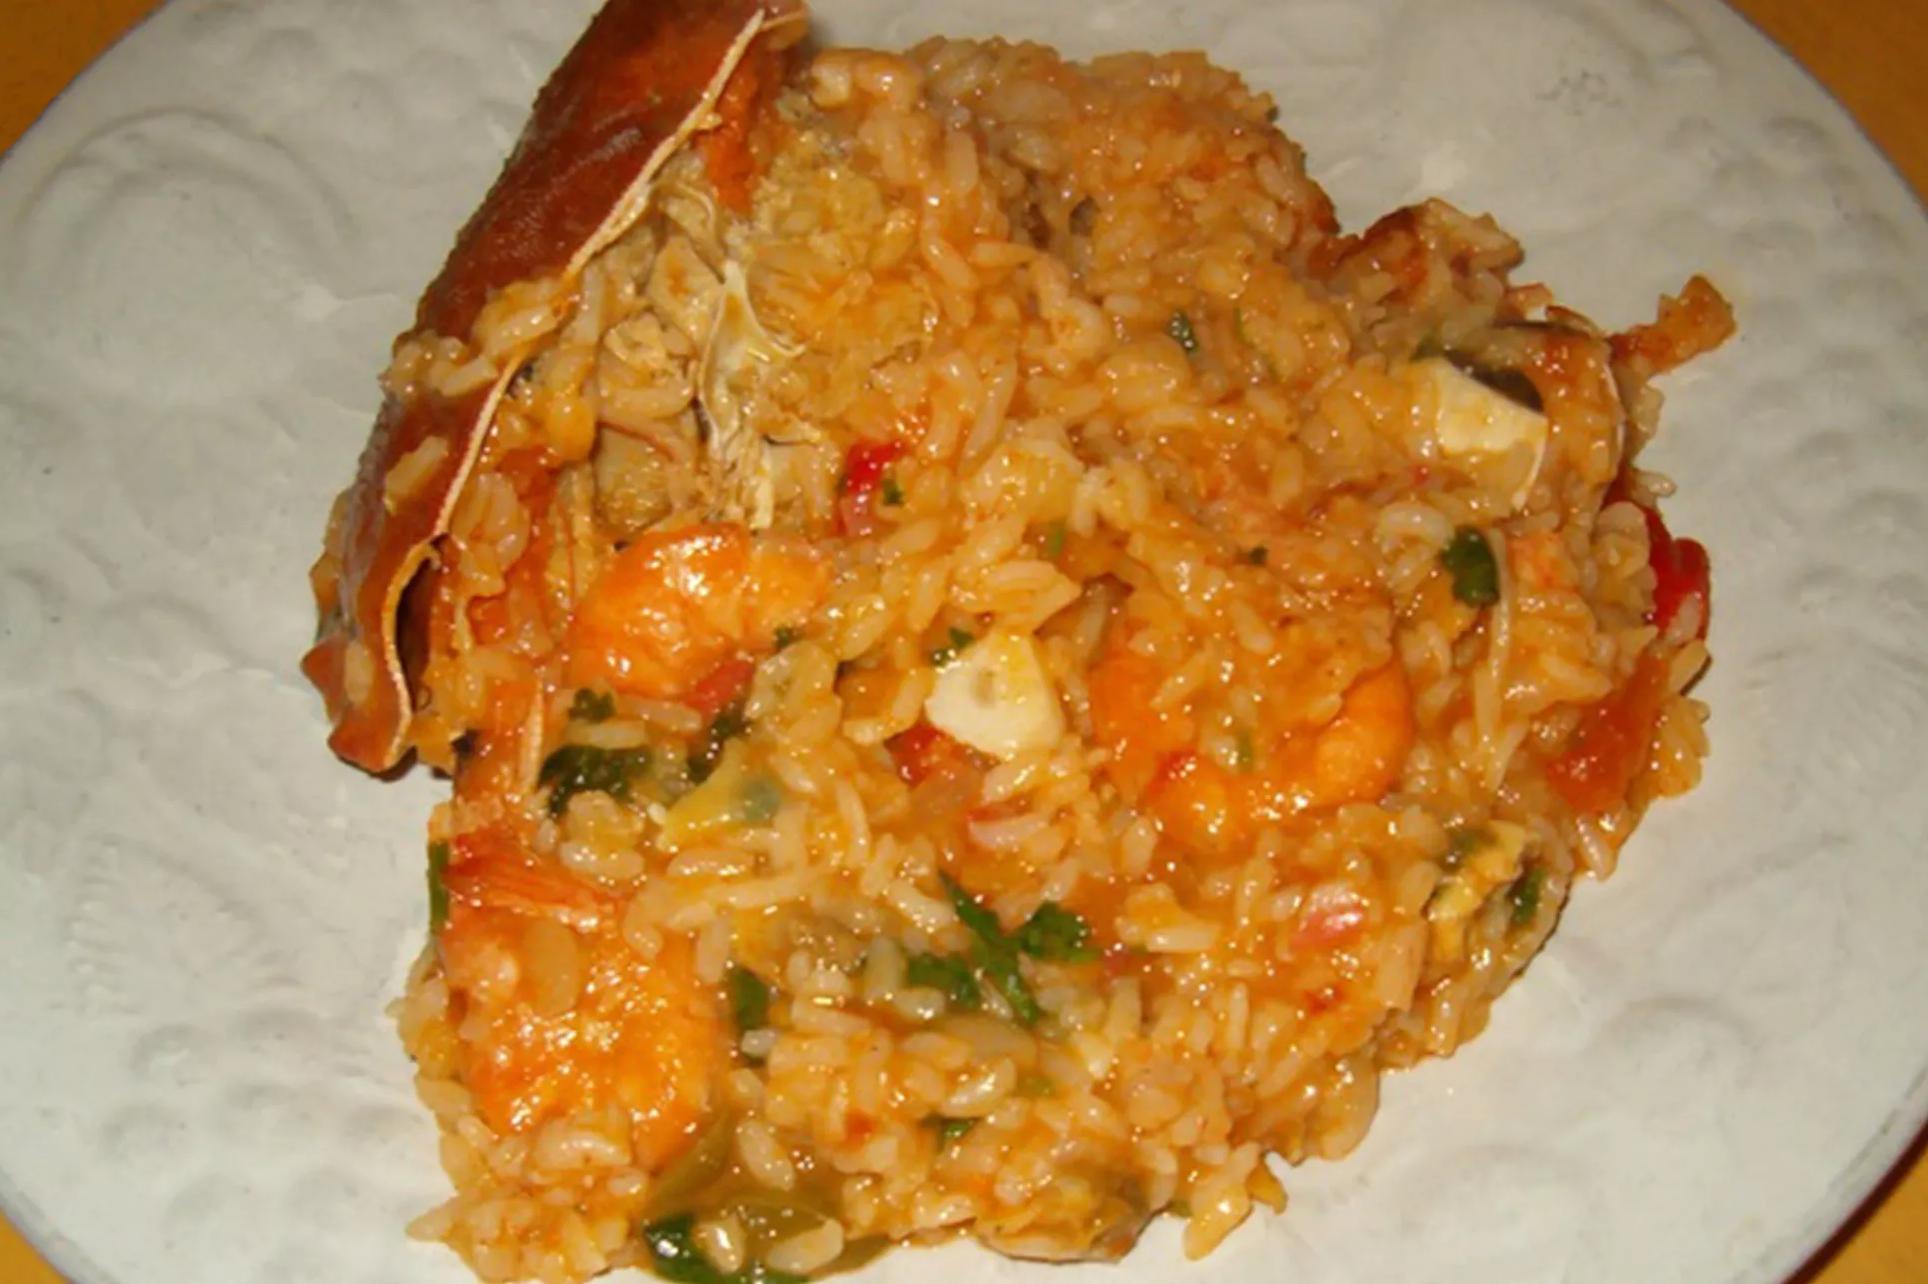  This Arroz de Marisco recipe is perfect for impressing your dinner guests.